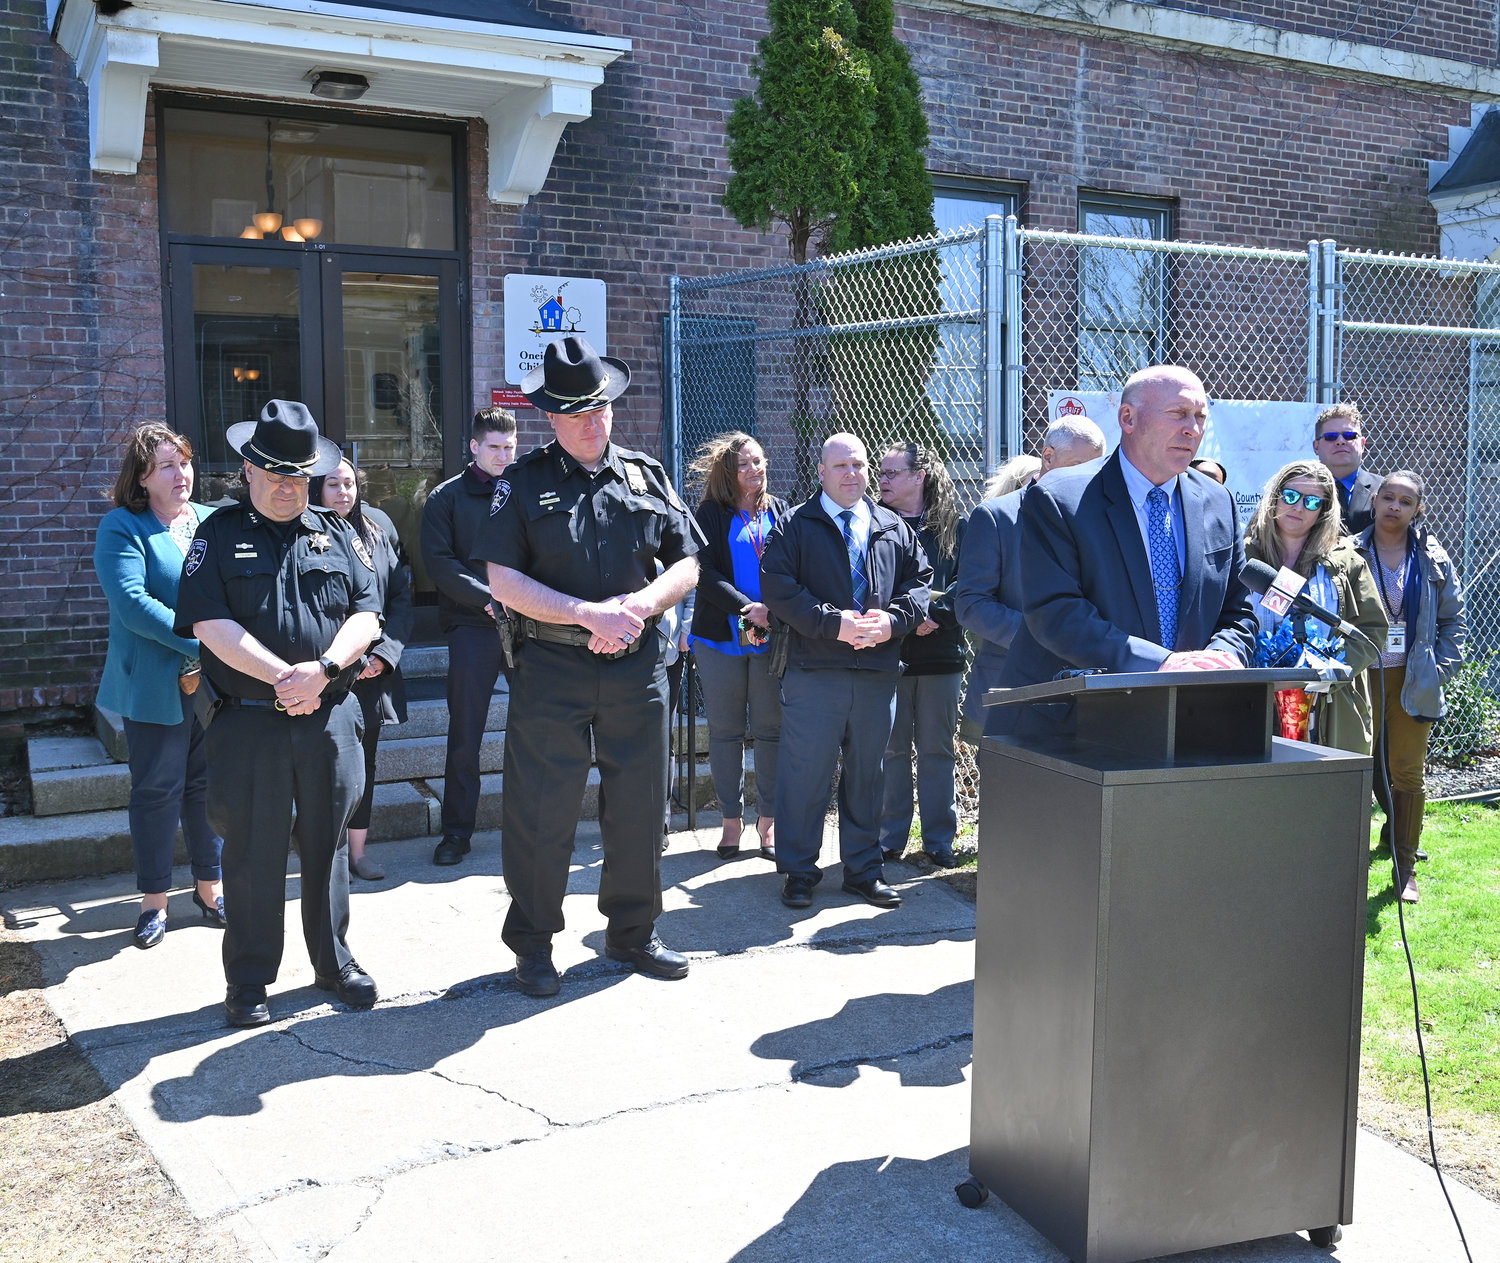 COUNTY LEADERS — Oneida County Chief Sheriff's Deputy Derrick O'Meara speaks on Thursday at the Child Advocacy Center, marking the end of National Child Abuse Prevention Month. O'Meara has been director of the agency for several years. He was joined by other county leaders, including Sheriff Robert M. Maciol, center, to make the occasion.